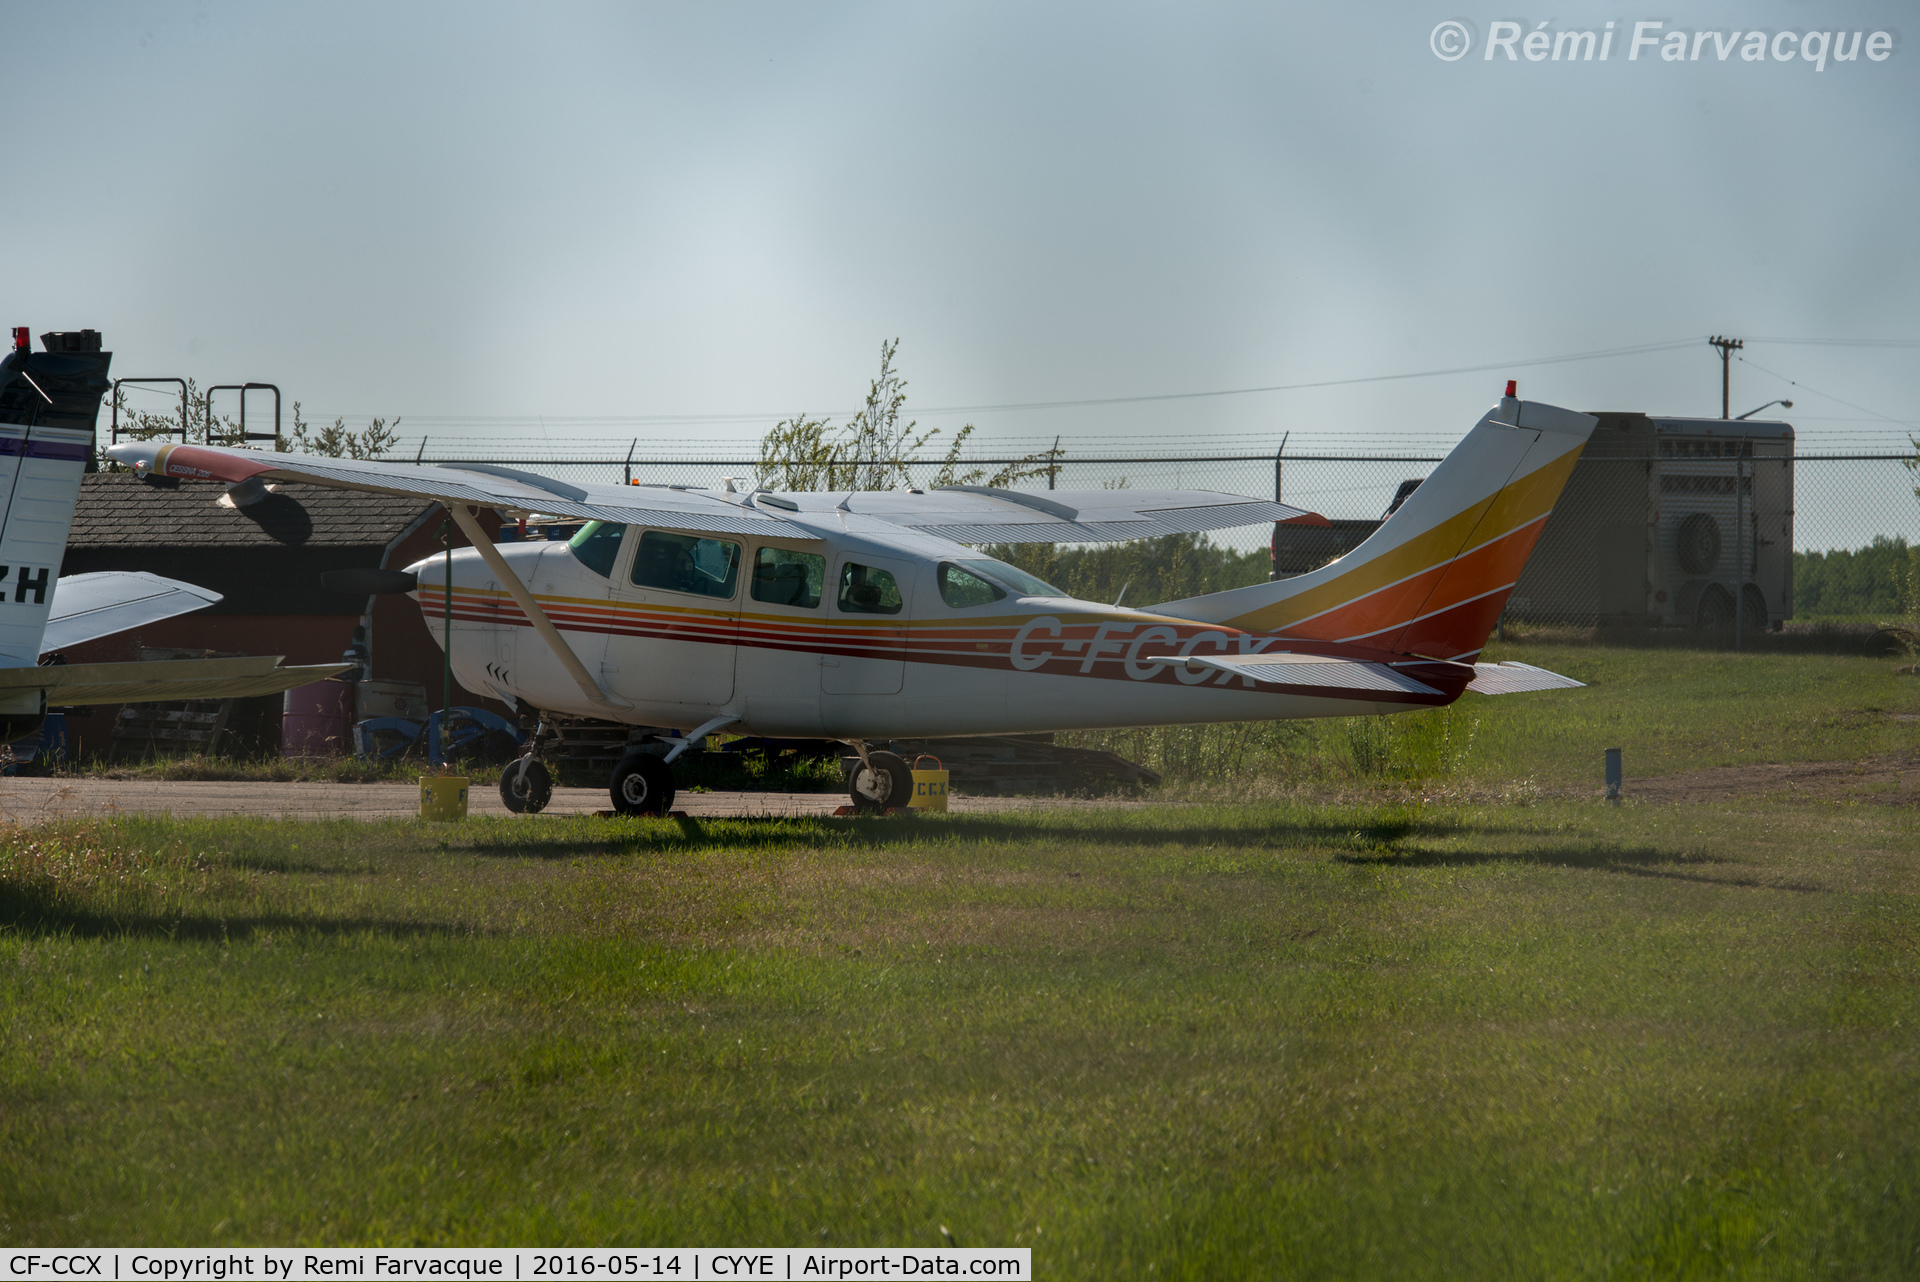 CF-CCX, 1965 Cessna P206 Super Skylane C/N P206-0065, Parked northeastern-most end of airfield.